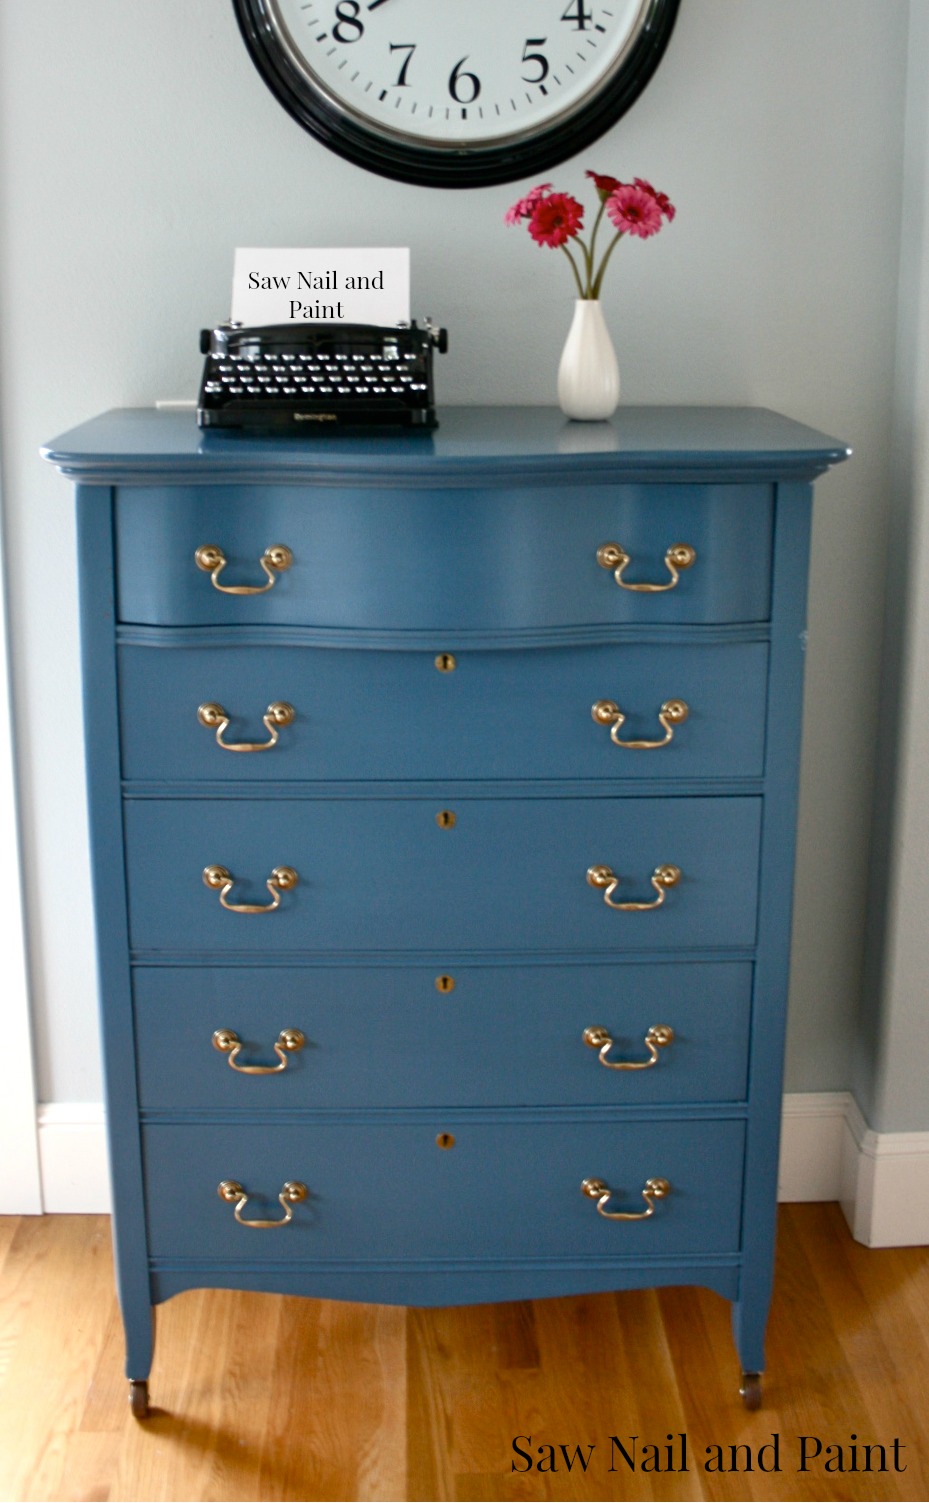 Vintage Blue Serpentine Dresser - Saw Nail and Paint